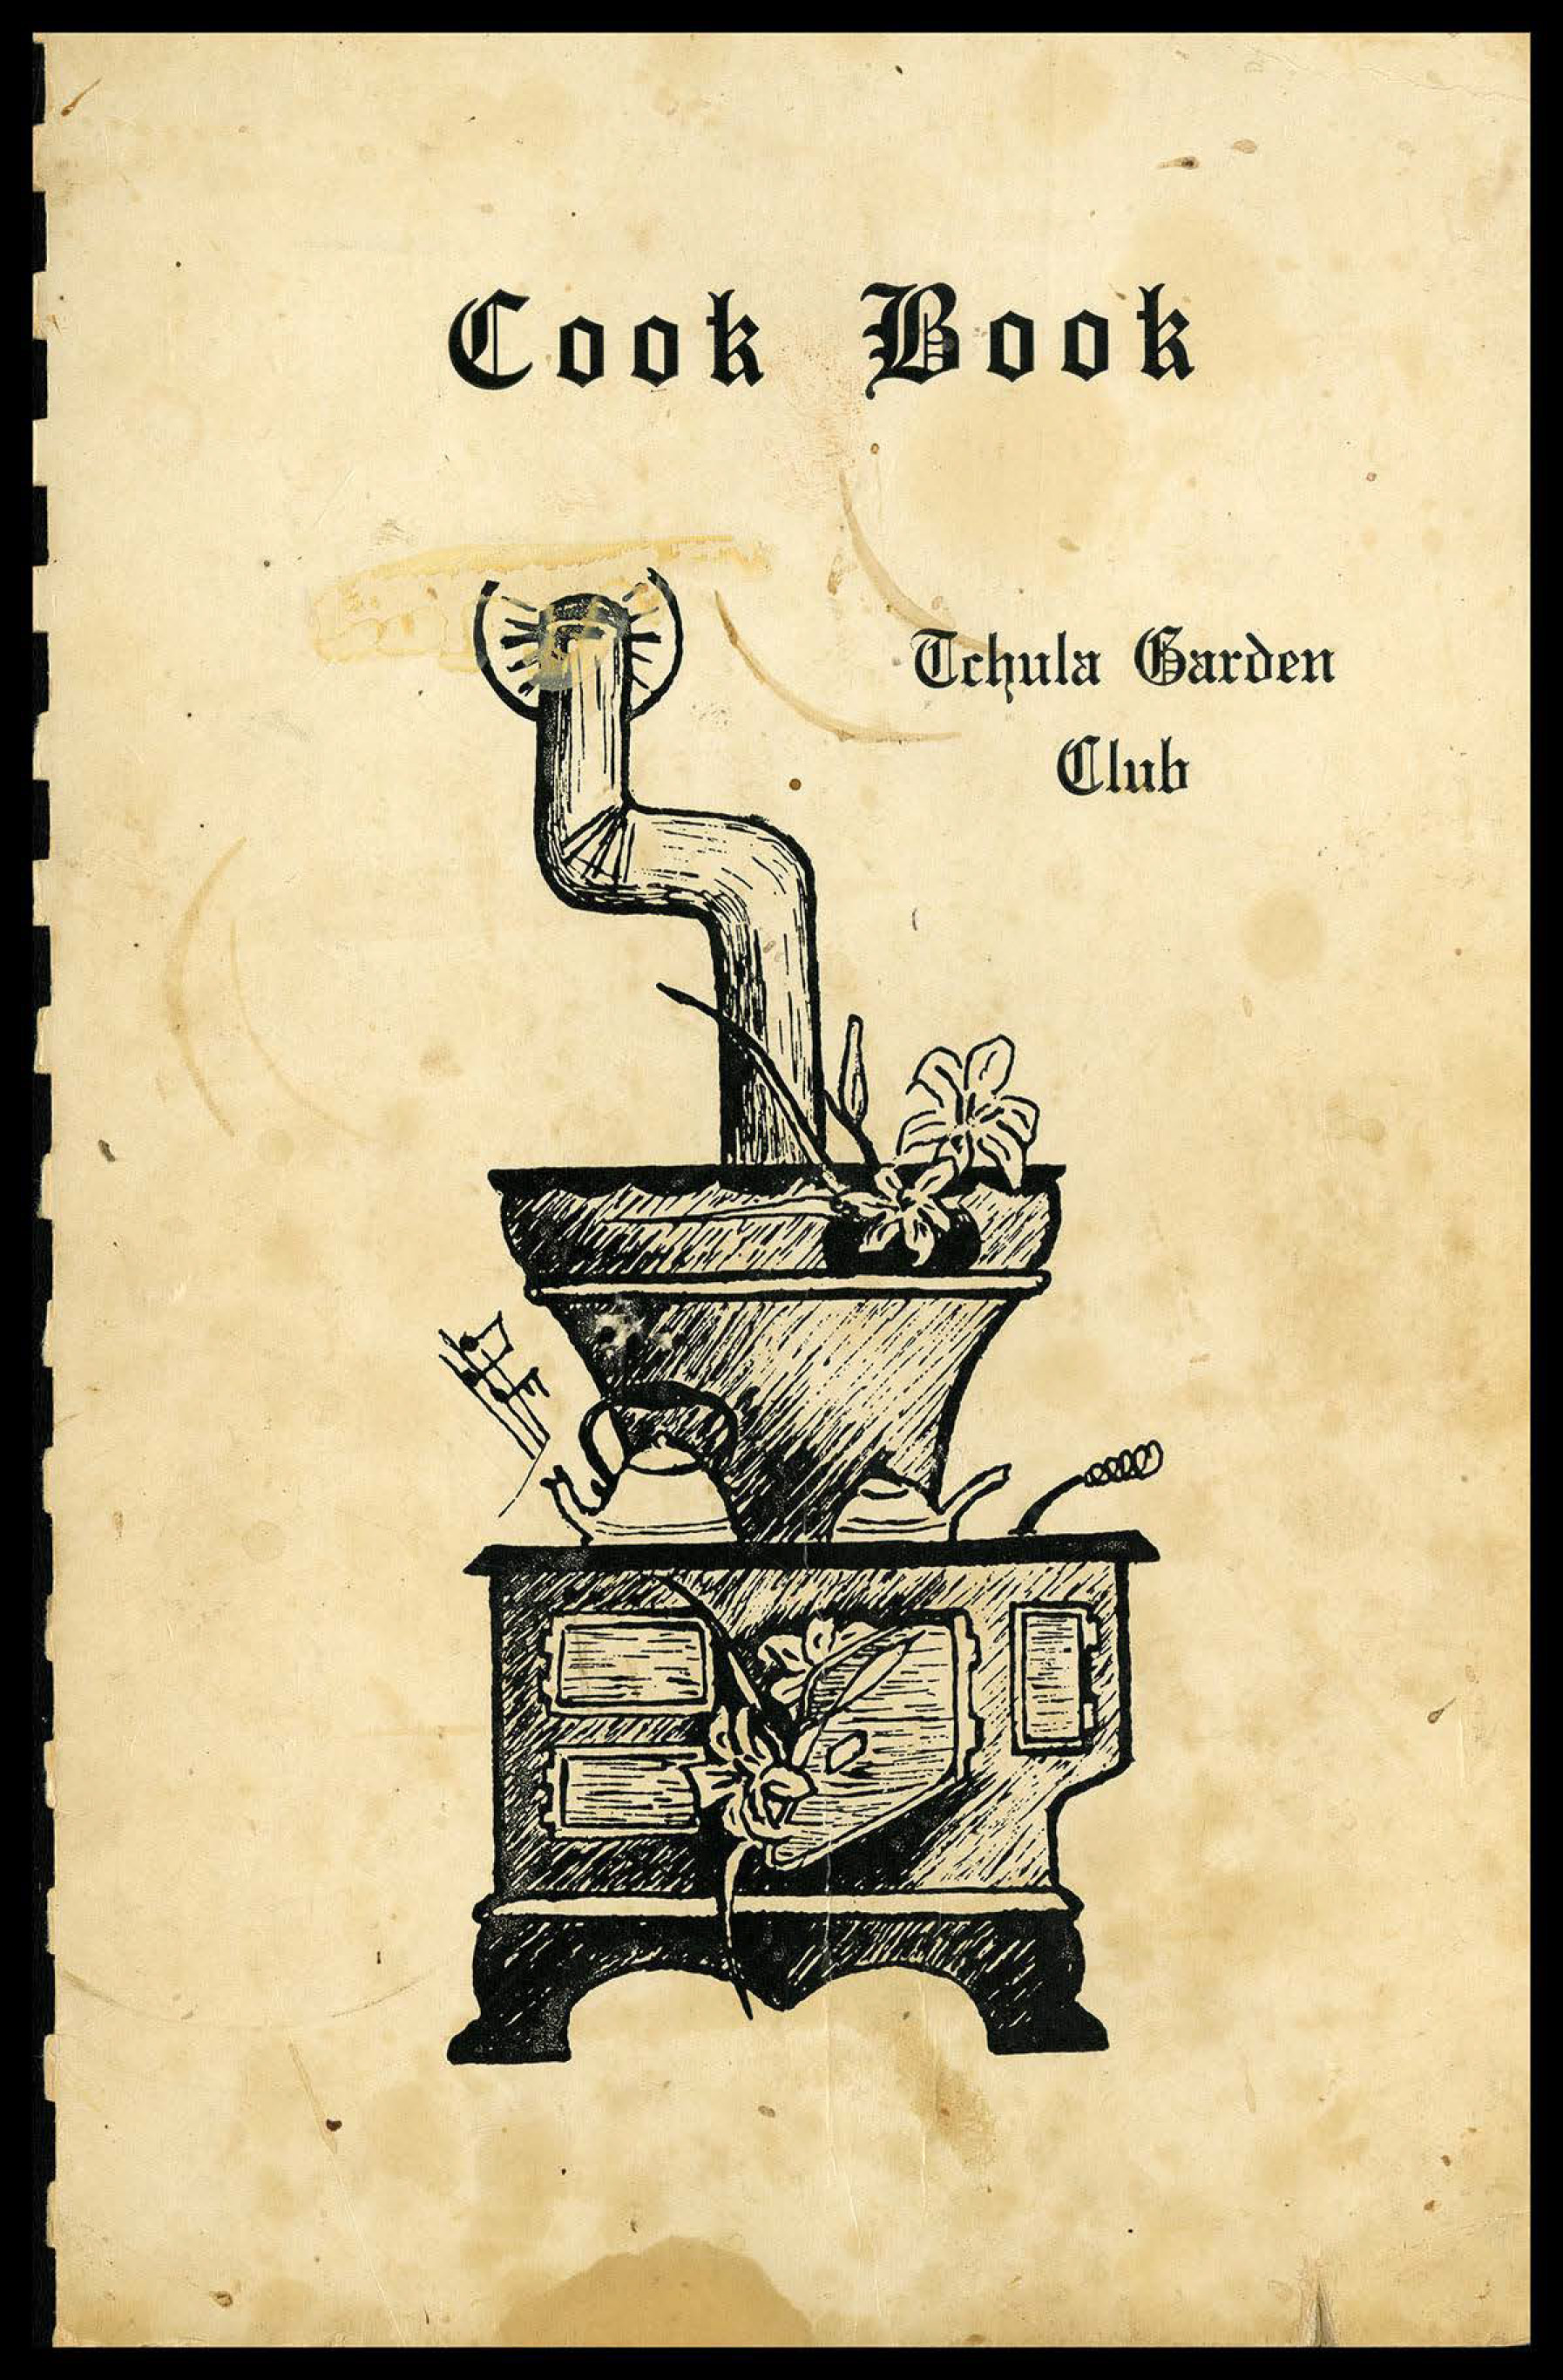 A yellowed piece of paper with a plastic ring binding. On it is a hand-drawn image of a wood stove and the text “Cook Book Tchula Garden Club” printed in a gothic blackletter.